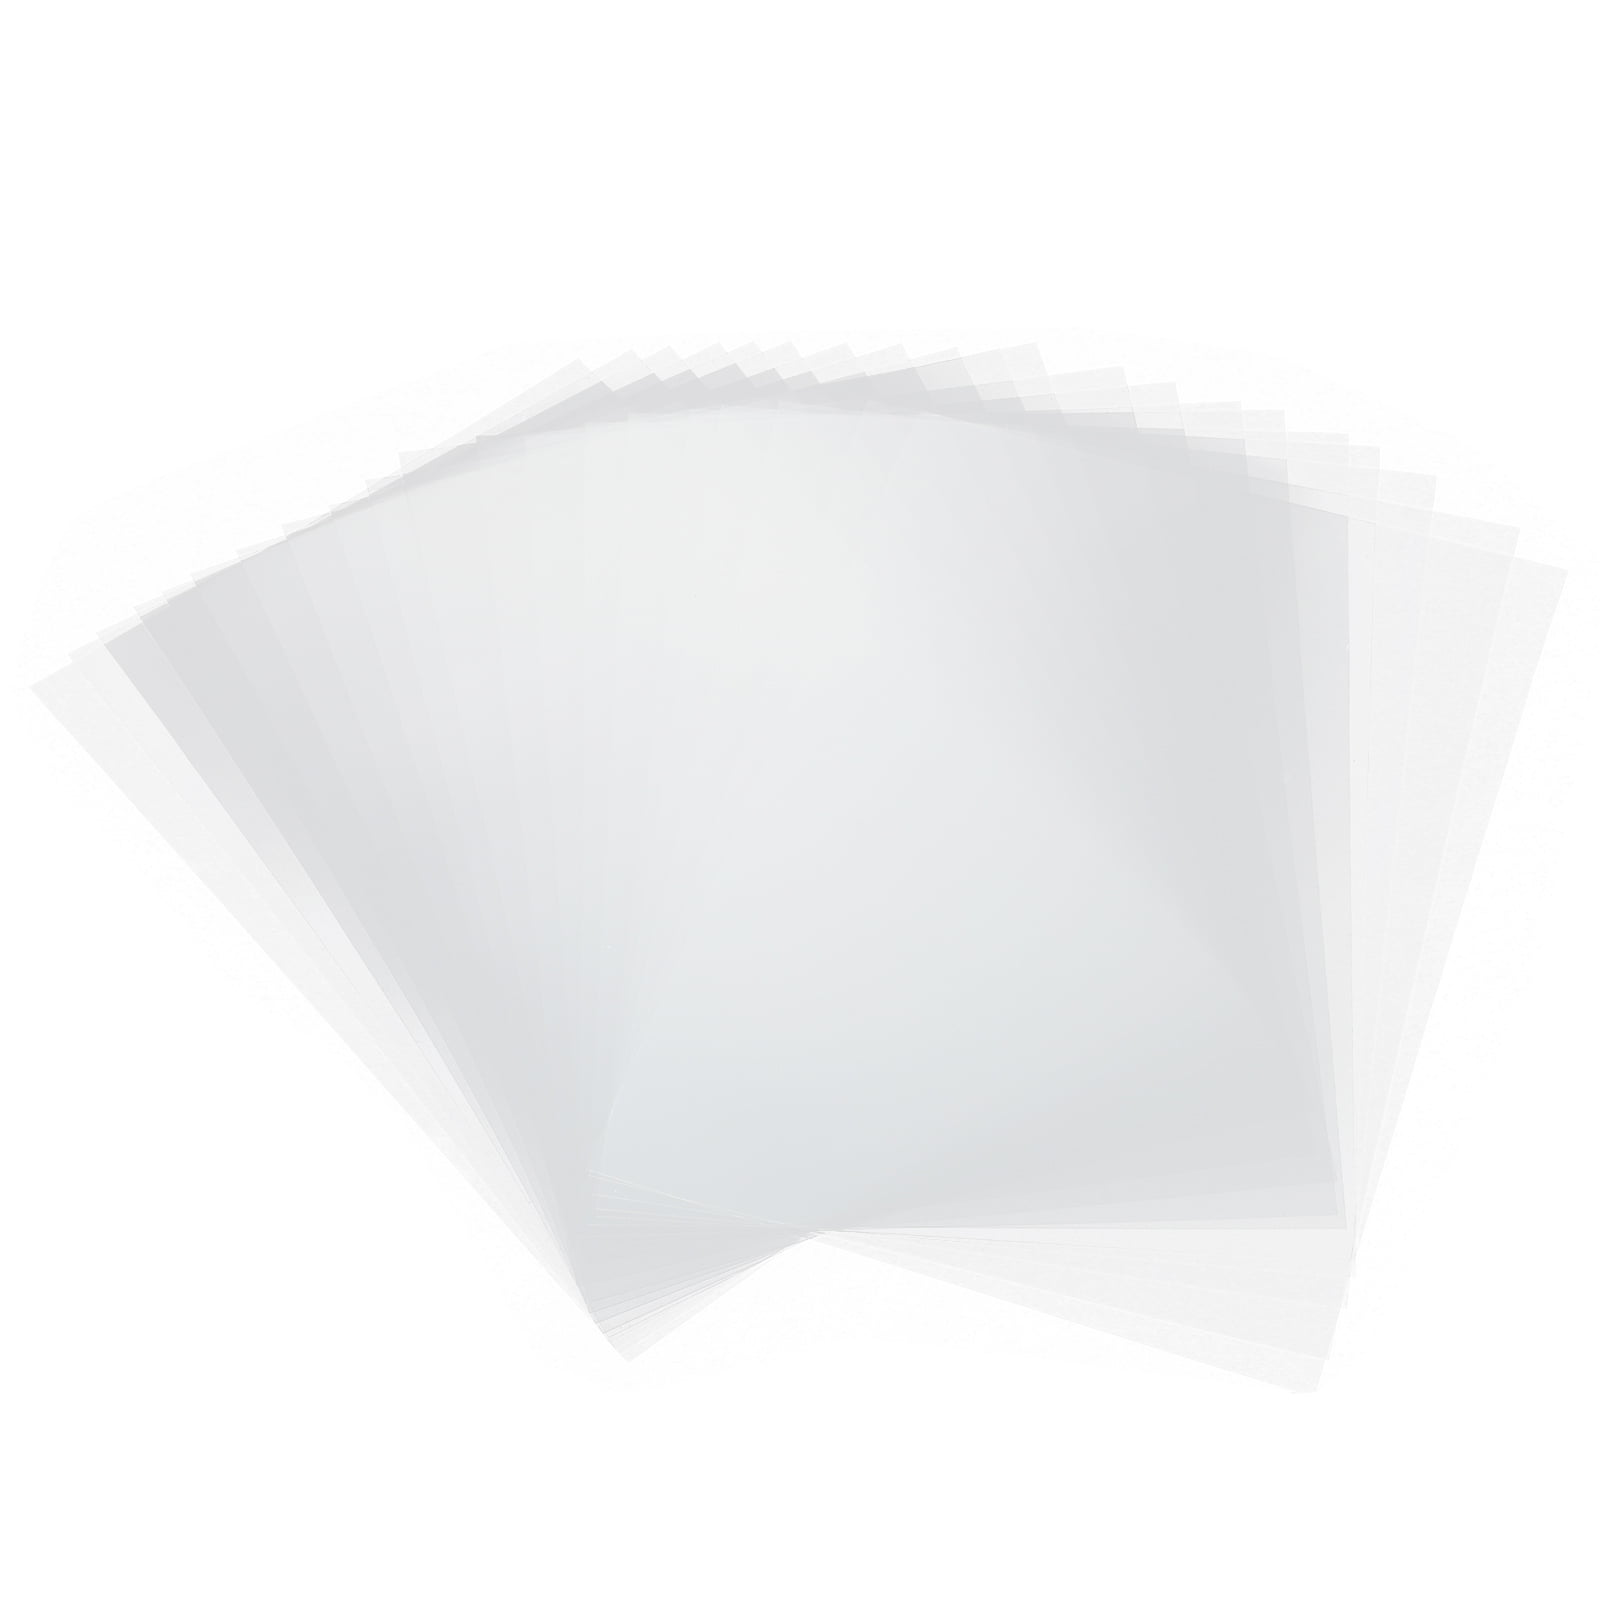  Uinkit Bulk 90 Sheets Printable Transparency Film Acetate  Clear Sheets for Crafts 8.5x11 OHP Overhead Projector Film For Inkjet  Printer Quick-Dry : Office Products